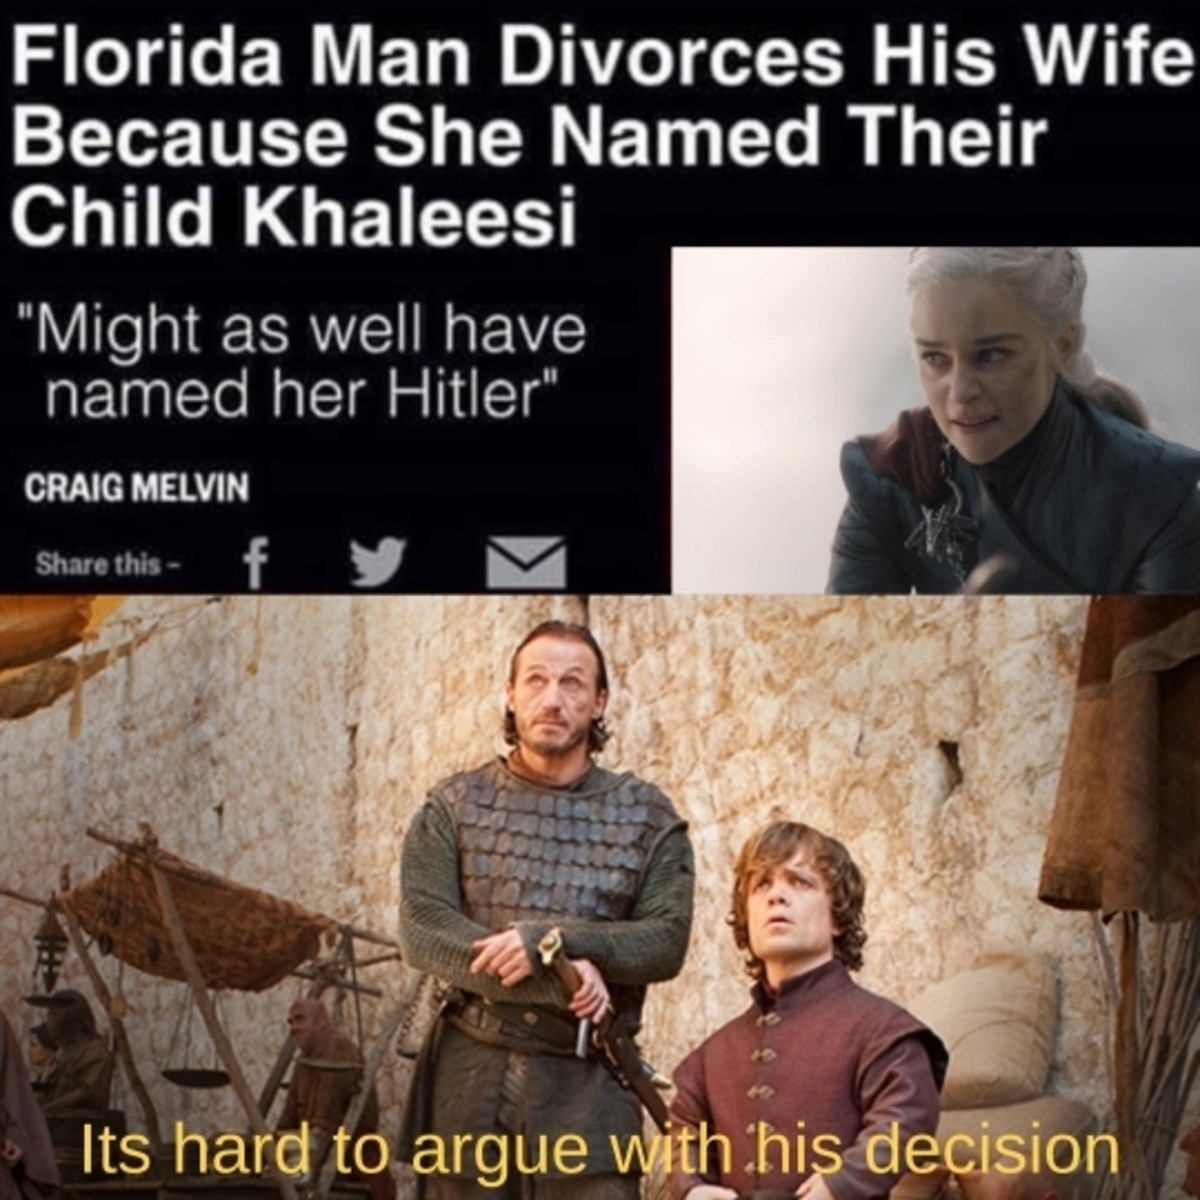 Game of Thrones - Florida Man Divorces His Wife Because She Named Their Child Khaleesi "Might as well have named her Hitler" Craig Melvin this f Its hard to argue with his decision